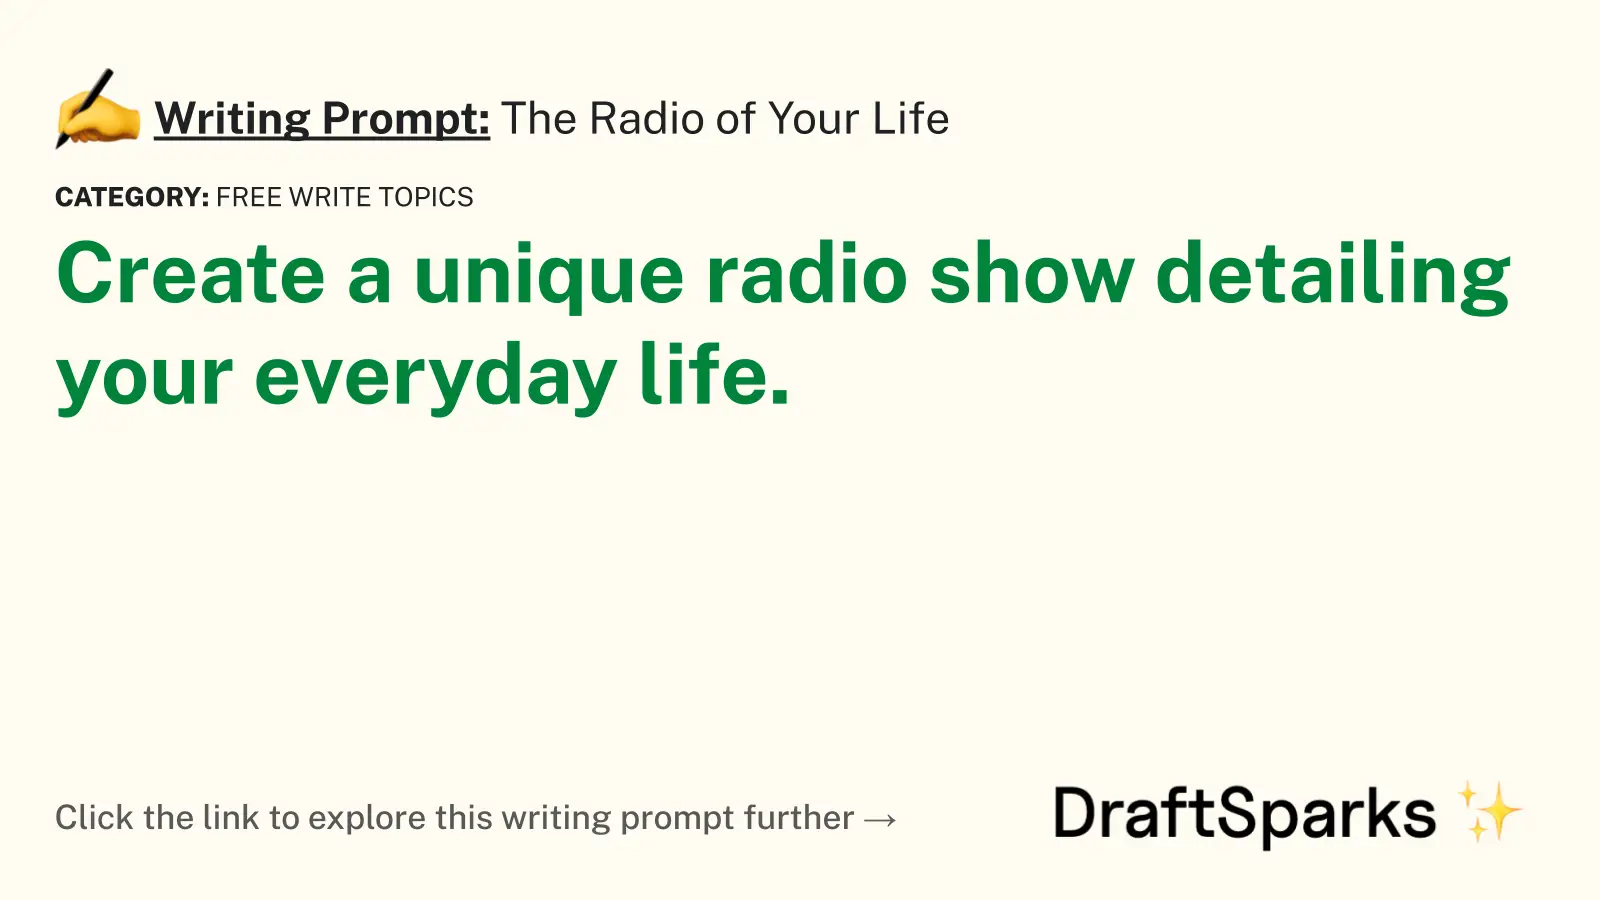 The Radio of Your Life